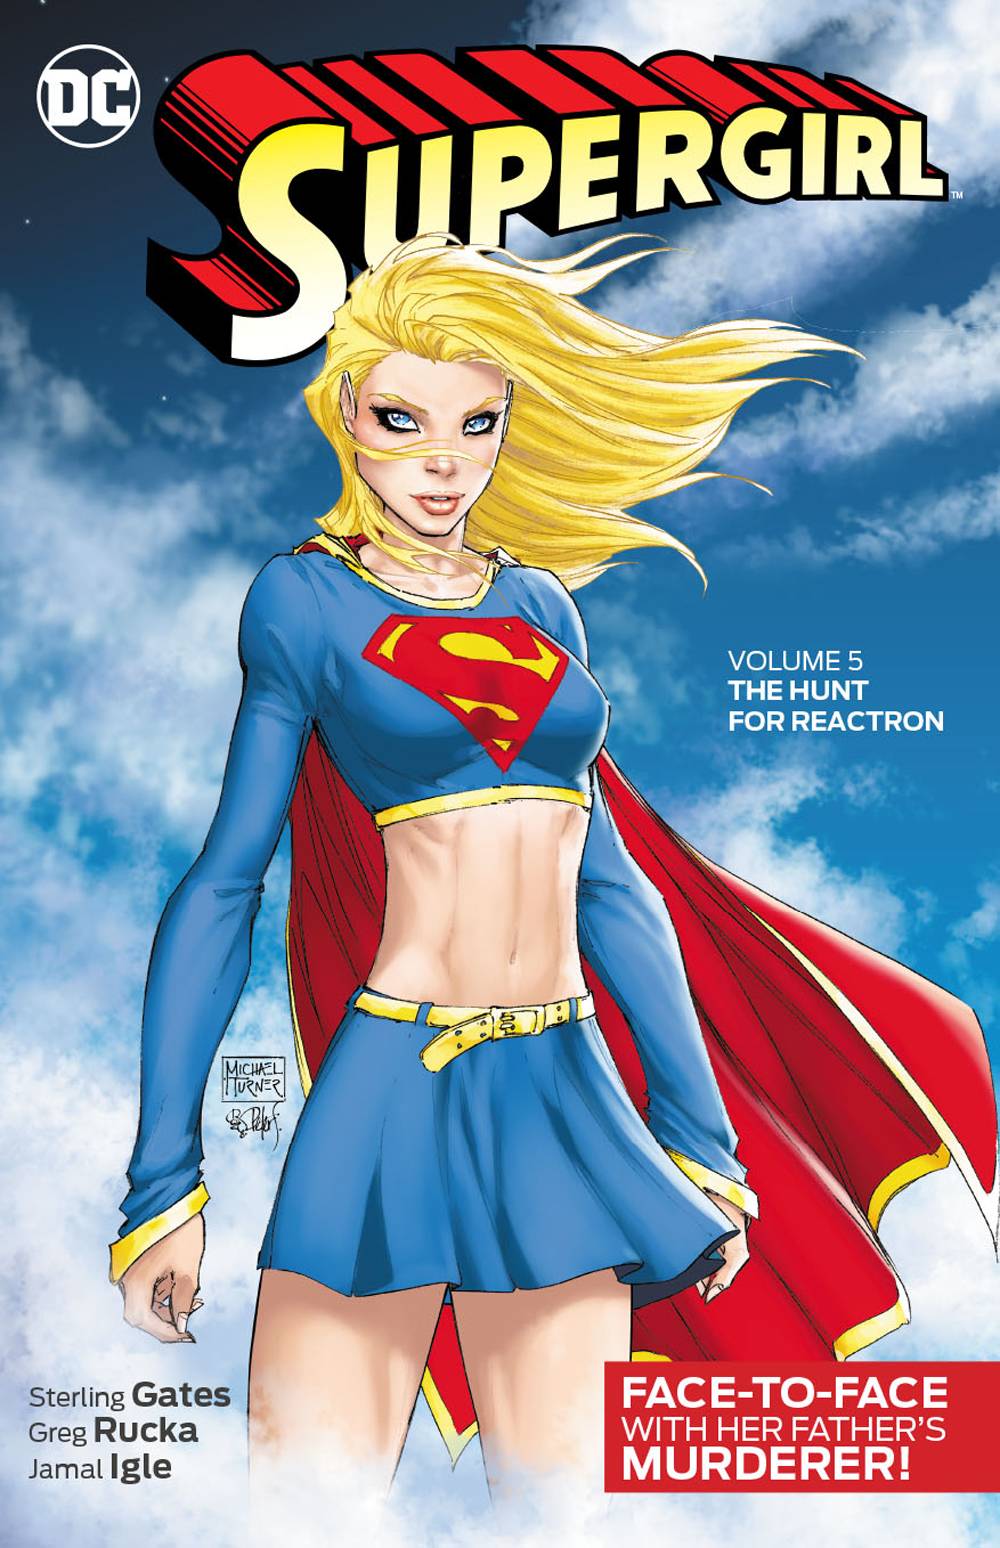 Supergirl Graphic Novel Volume 5 The Hunt For Reactron